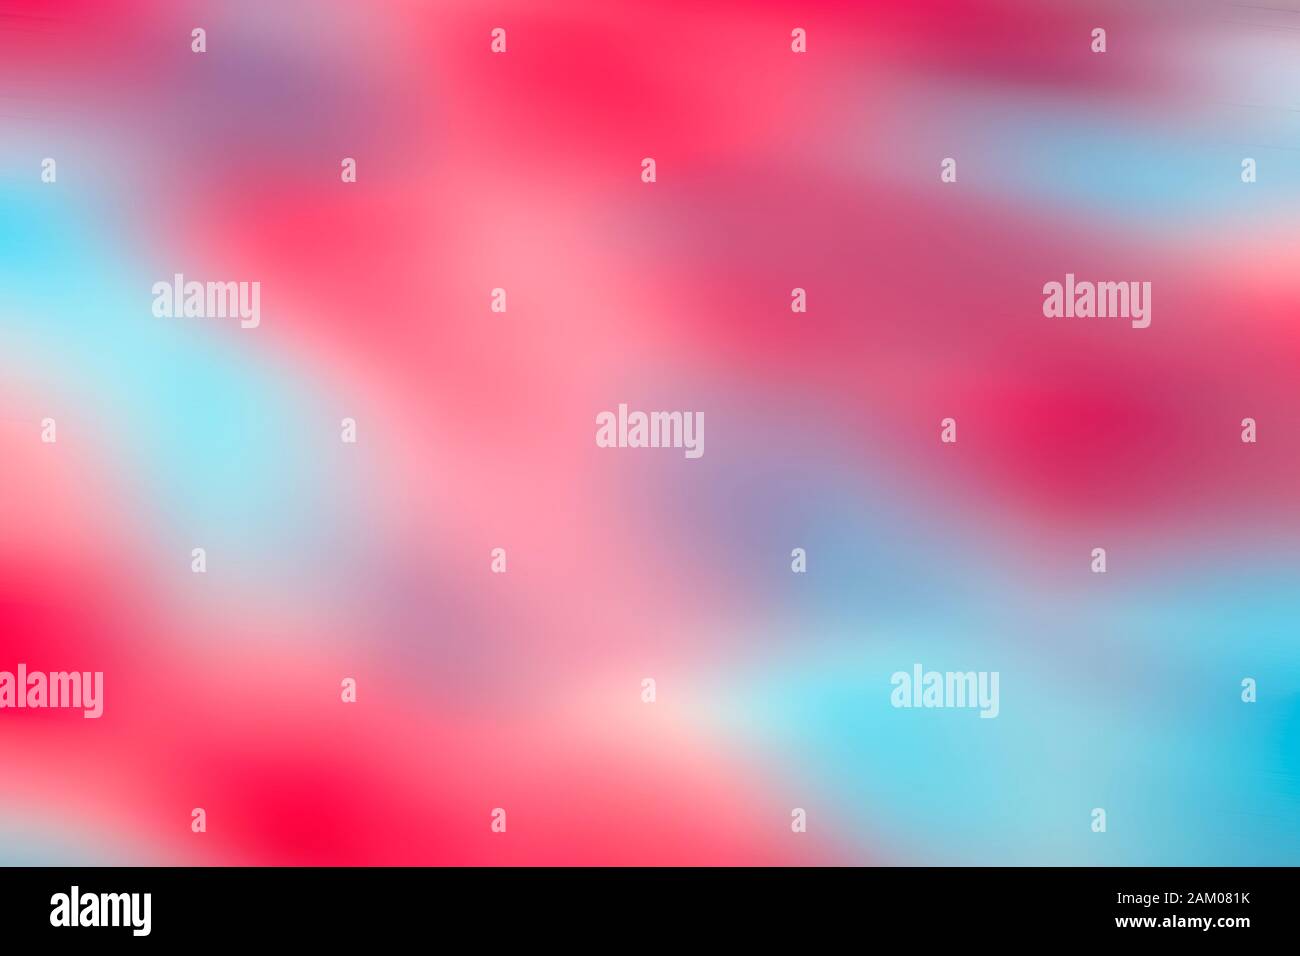 Multi colored blue and red abstract background pattern Stock Photo